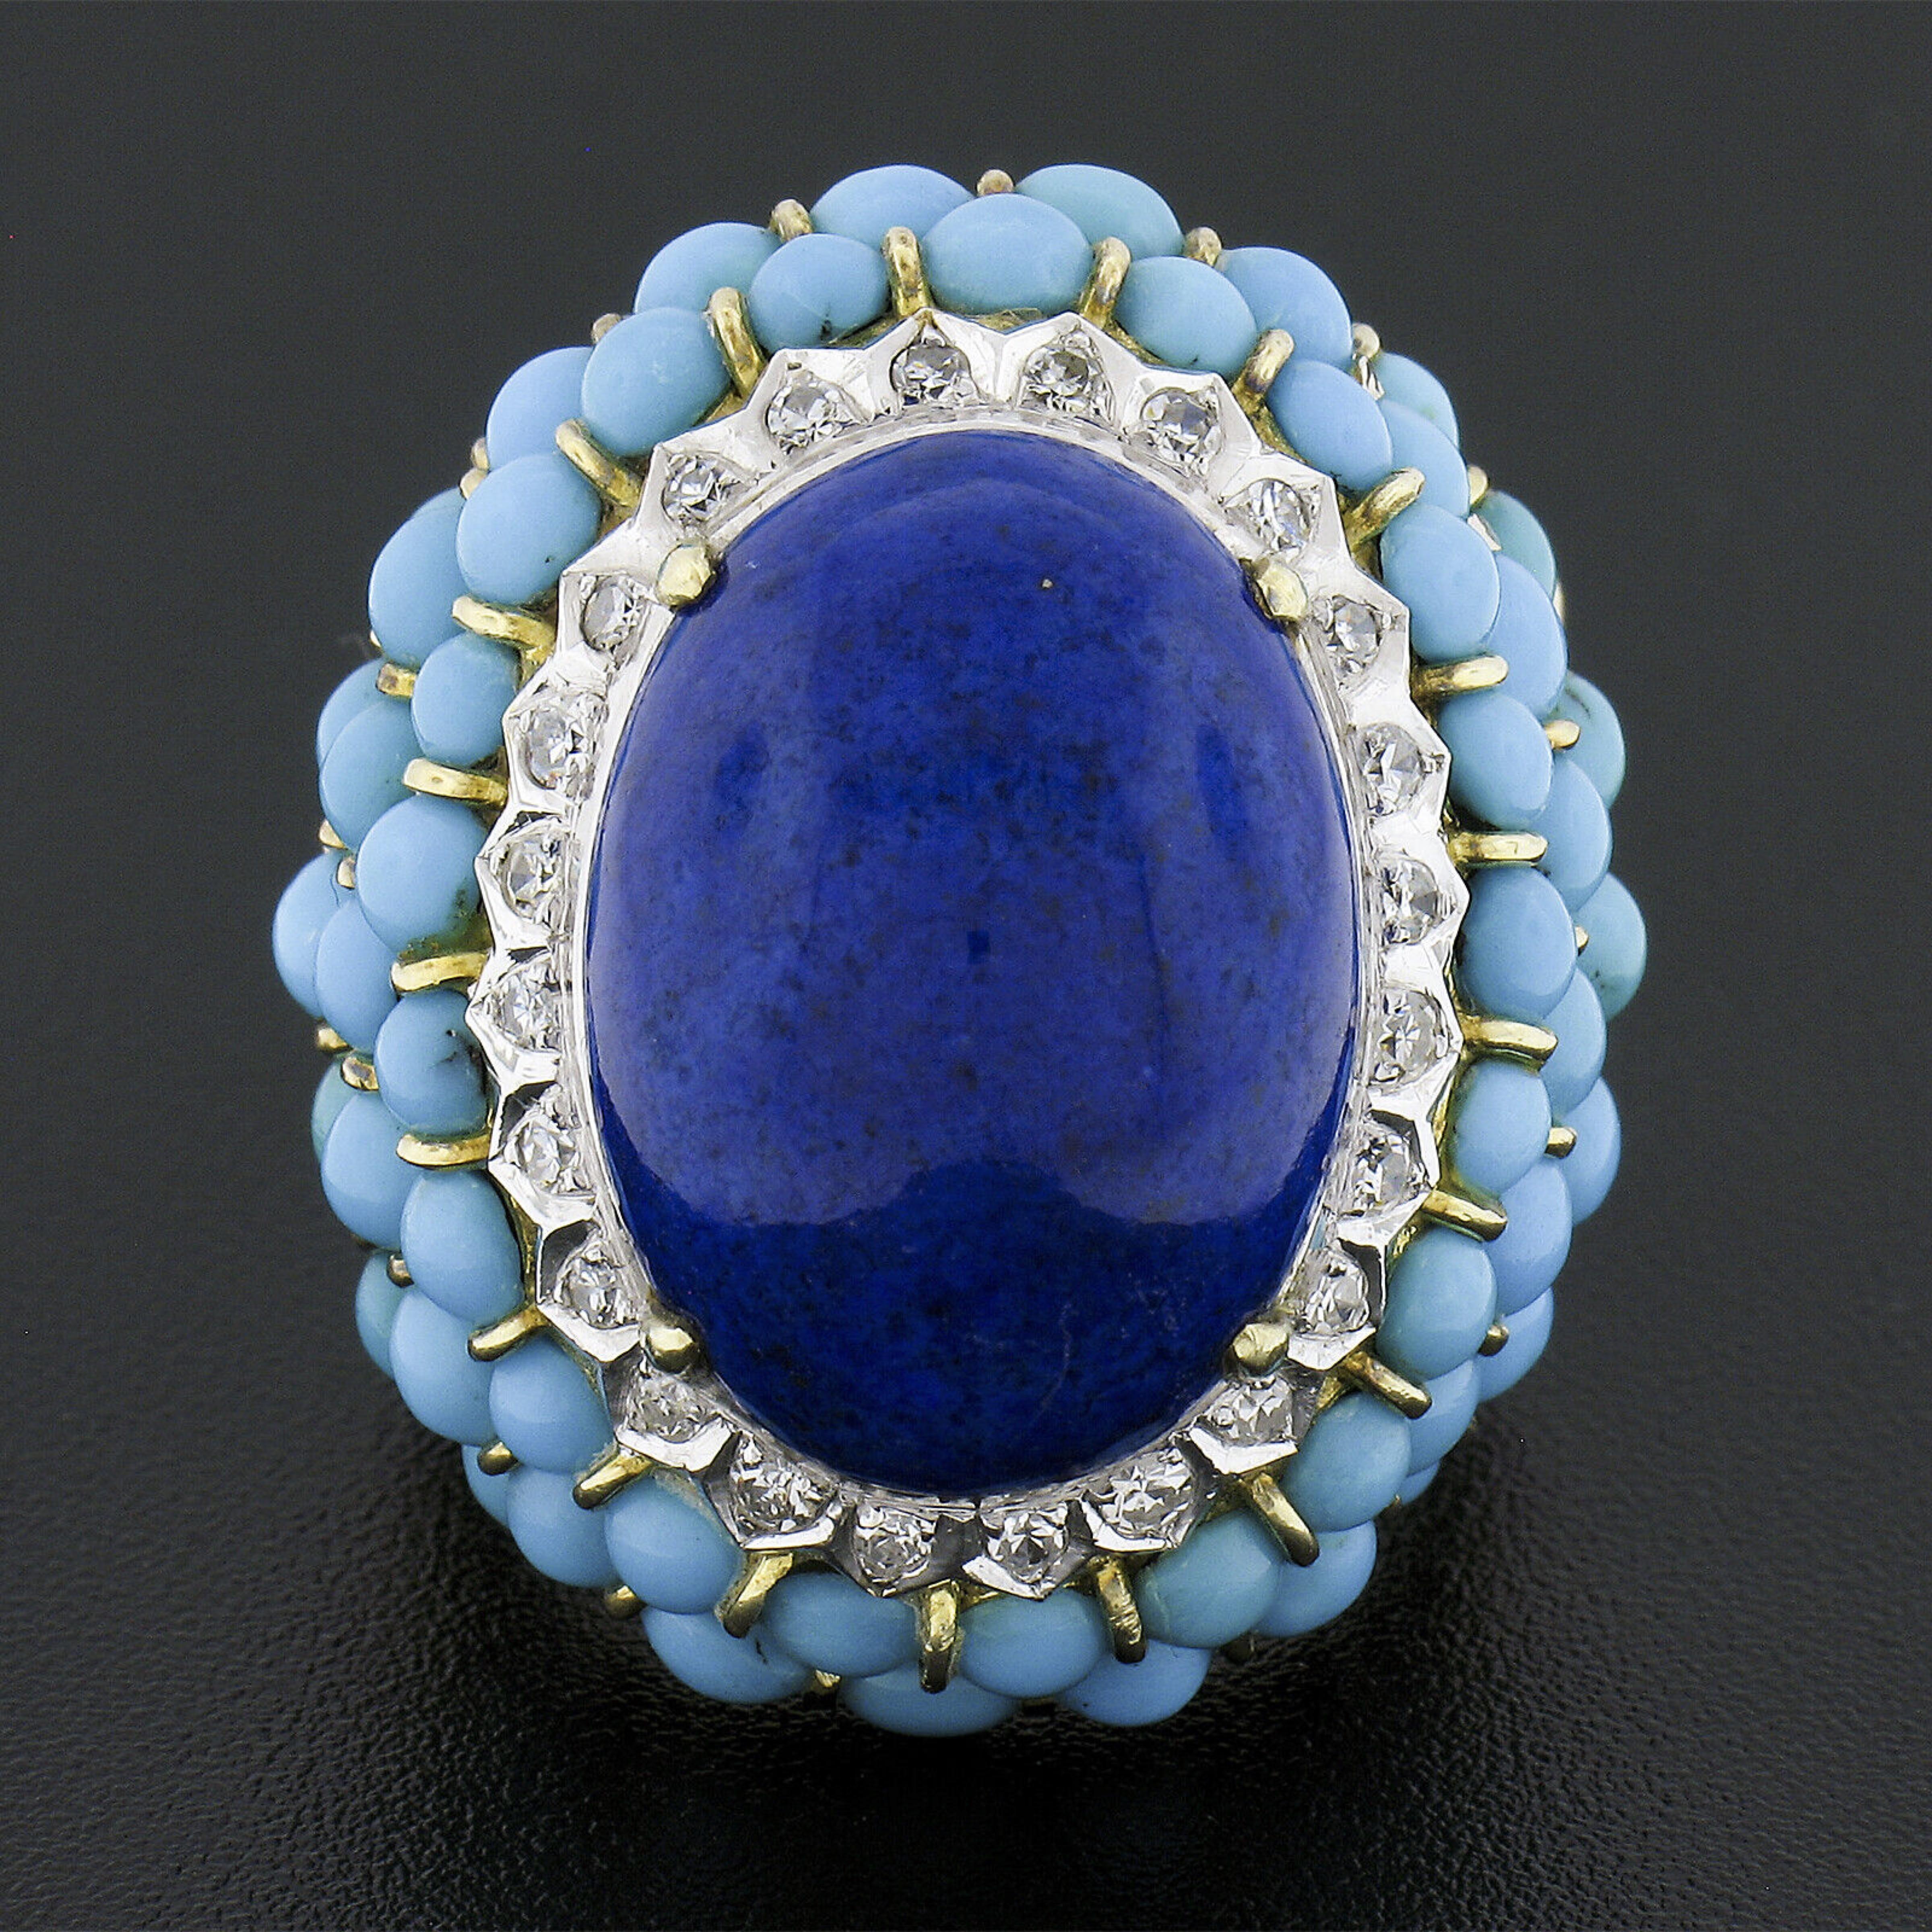 Here we have an absolutely magnificent and uniquely designed vintage cocktail ring that is crafted from solid 14k yellow and white gold. It features a gorgeous, high quality, natural lapis stone neatly prong set at its center and further accented